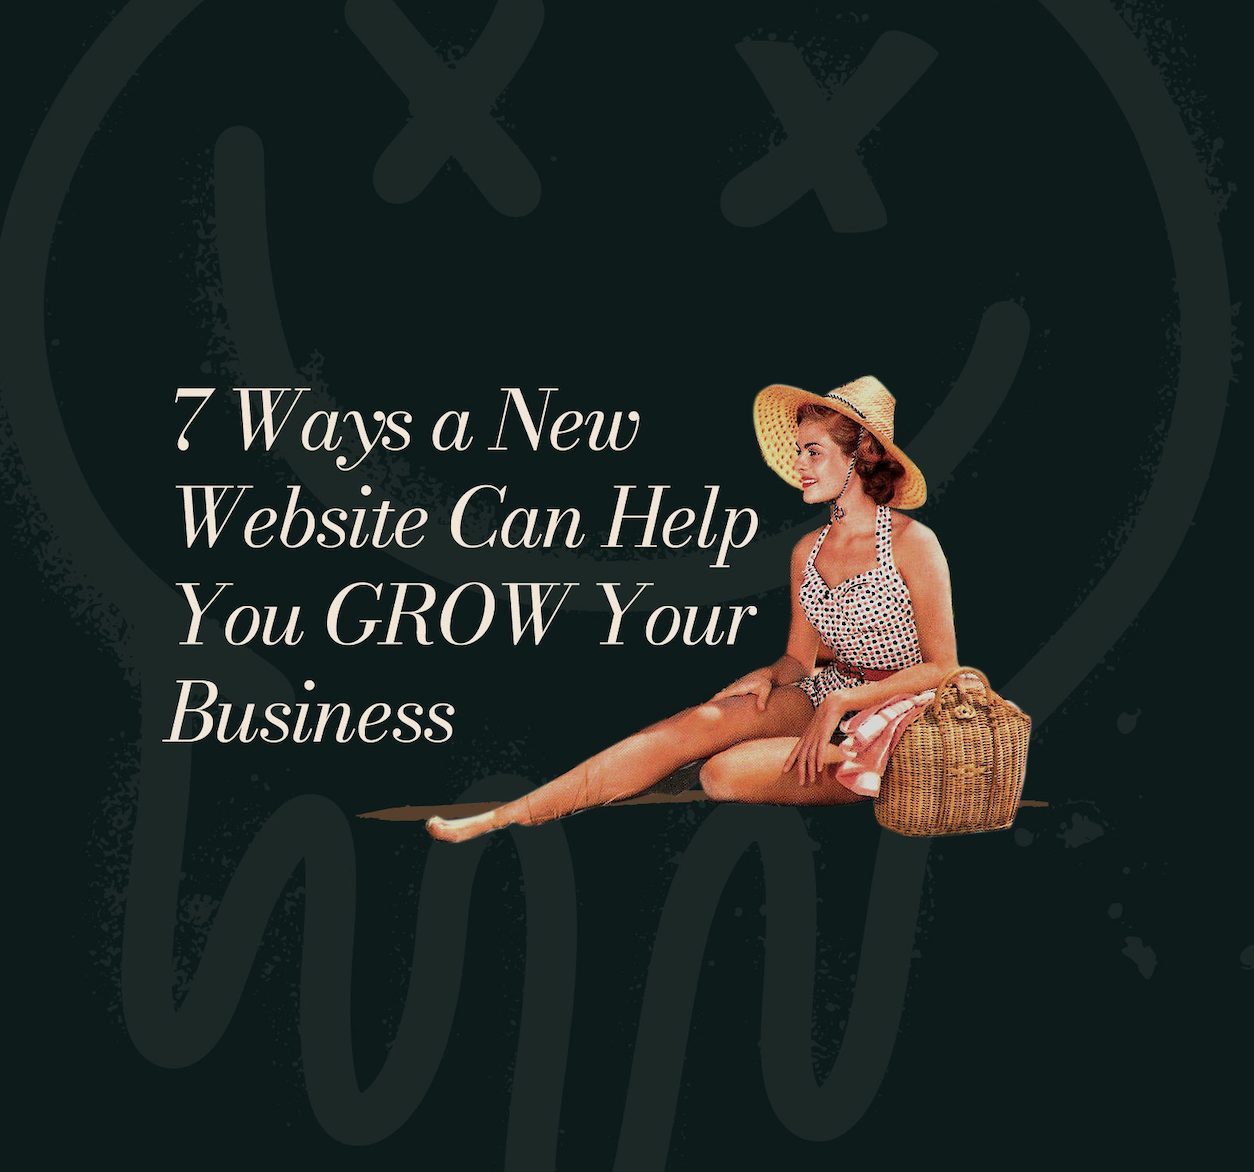 7 Ways a New Website Can Help You GROW YOUR BUSINESS